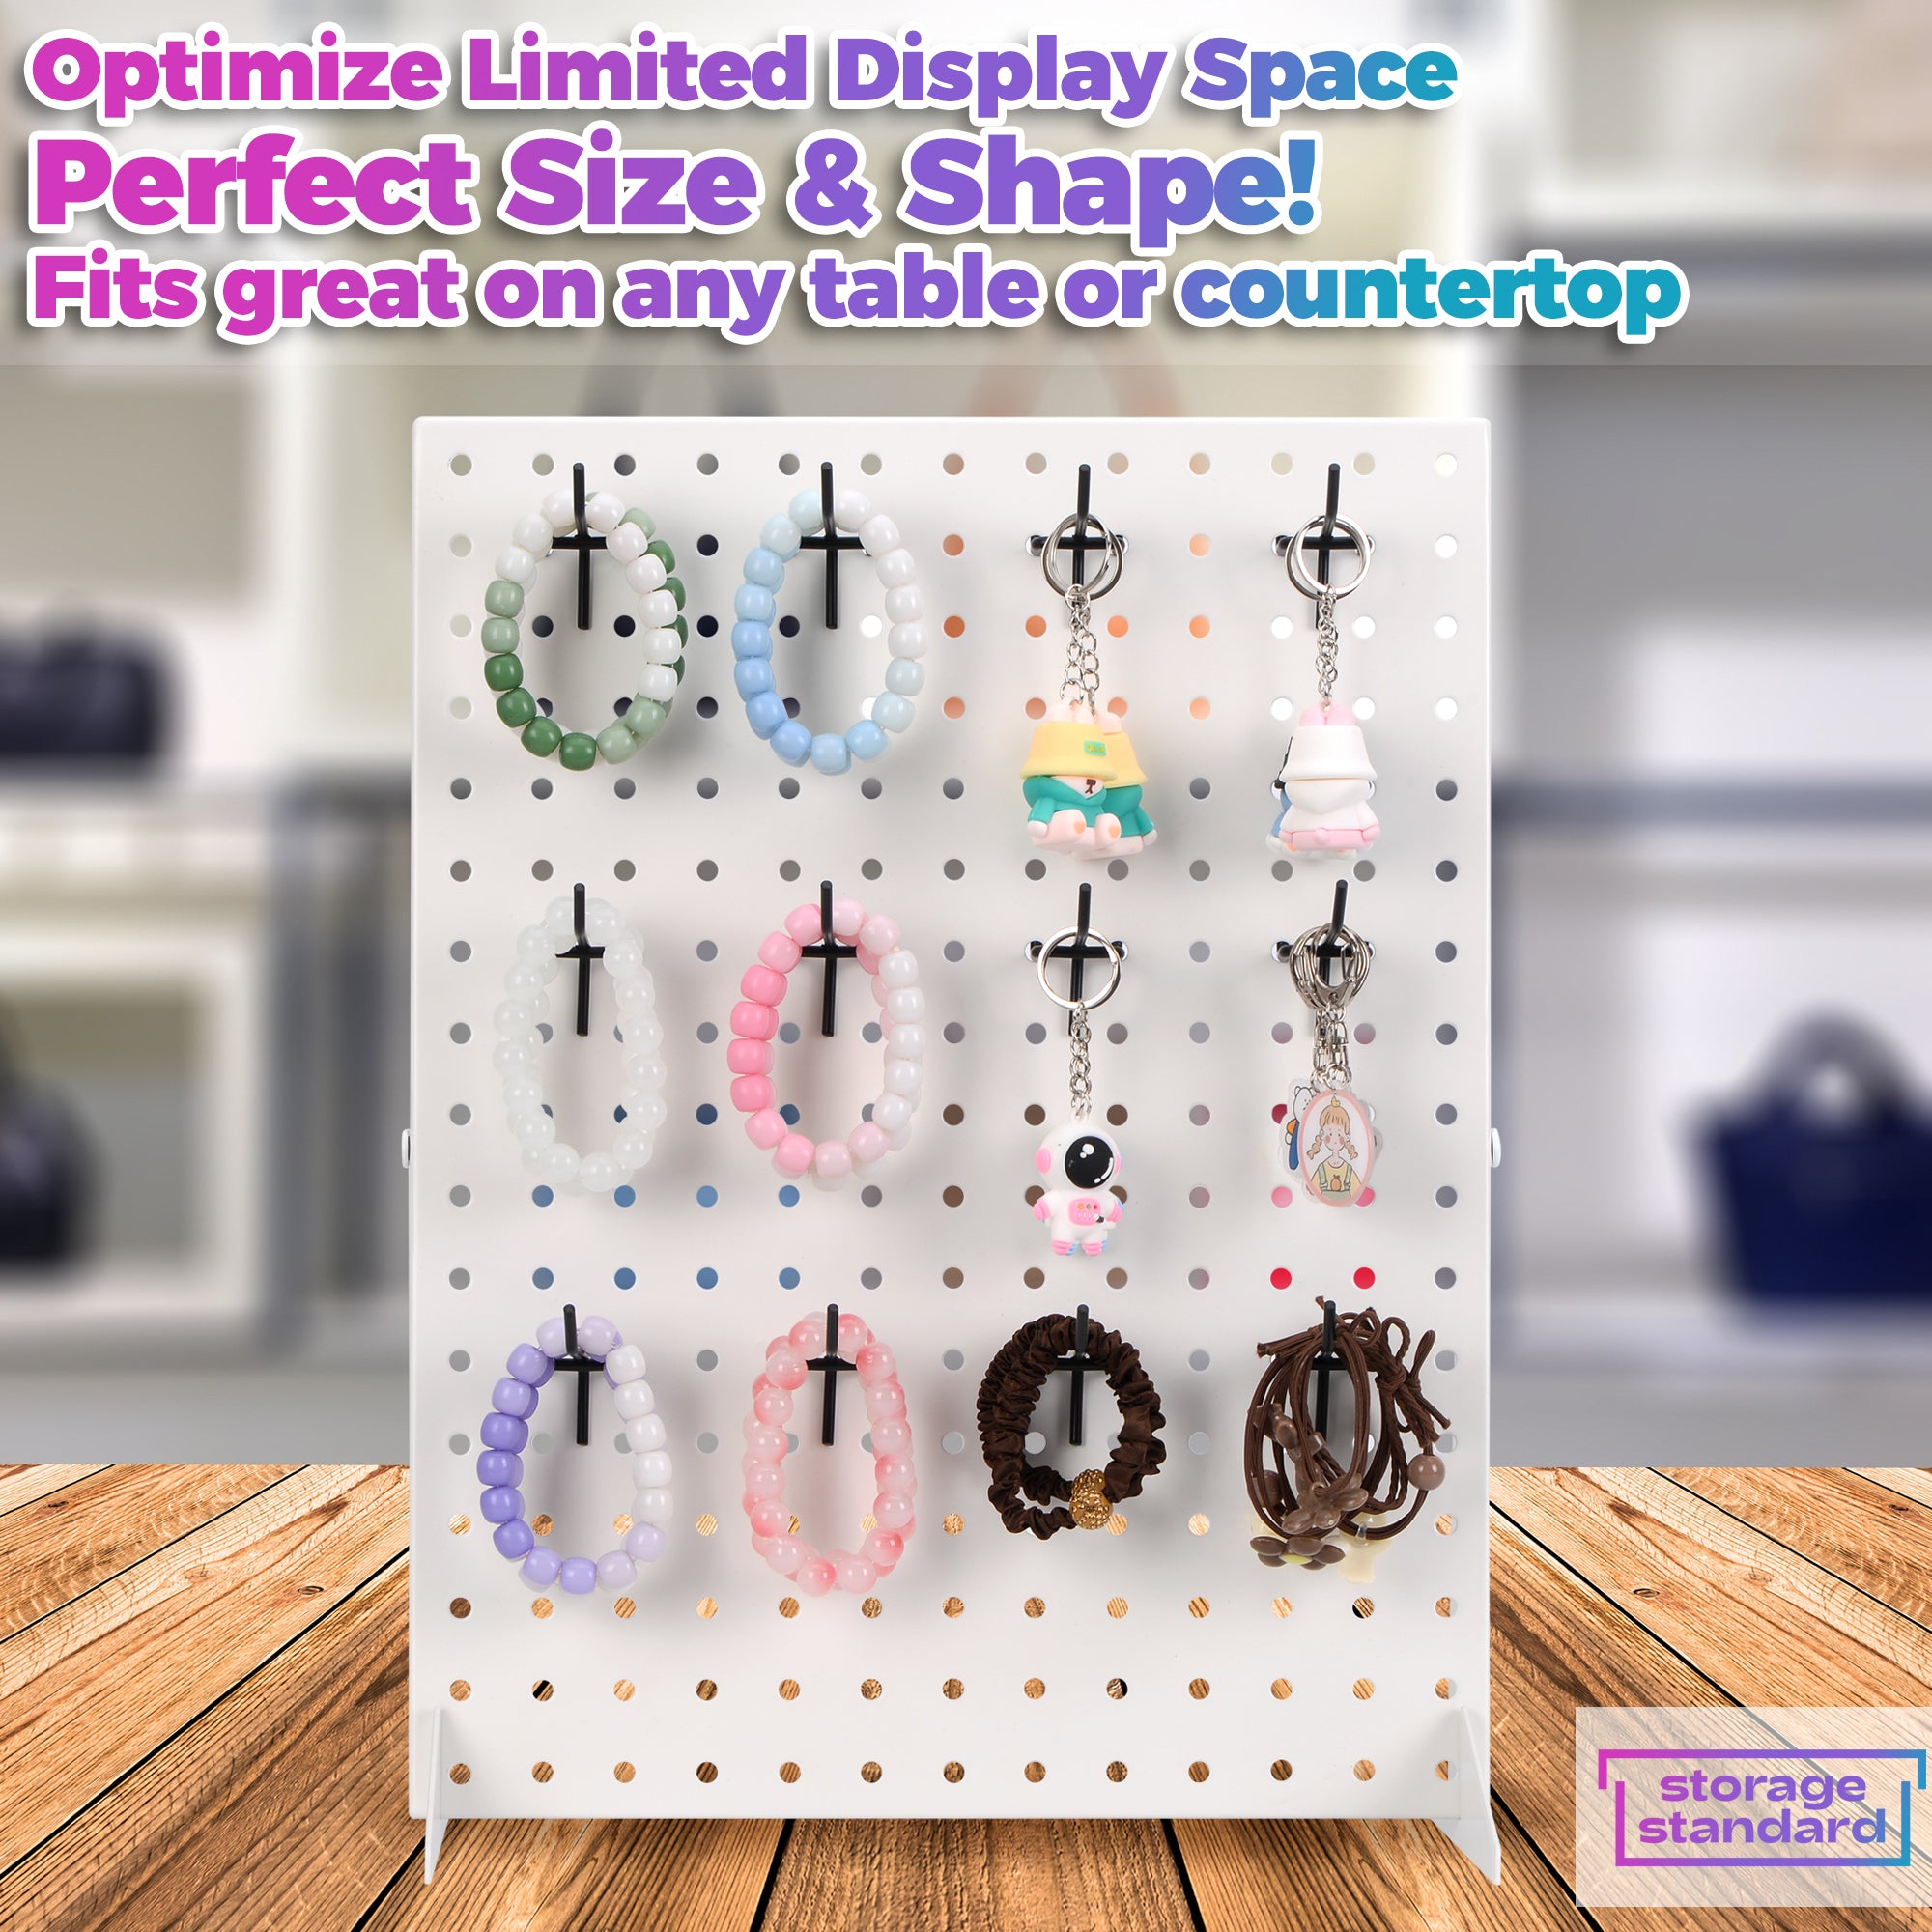 Pegboard Display Stand for Craft Shows & Fairs - Metal Store Display for Selling Accessories, Earring, Jewelry, Pin Display Stands for Retail Stores, Vendors & Events - 17" x 13” Designer White